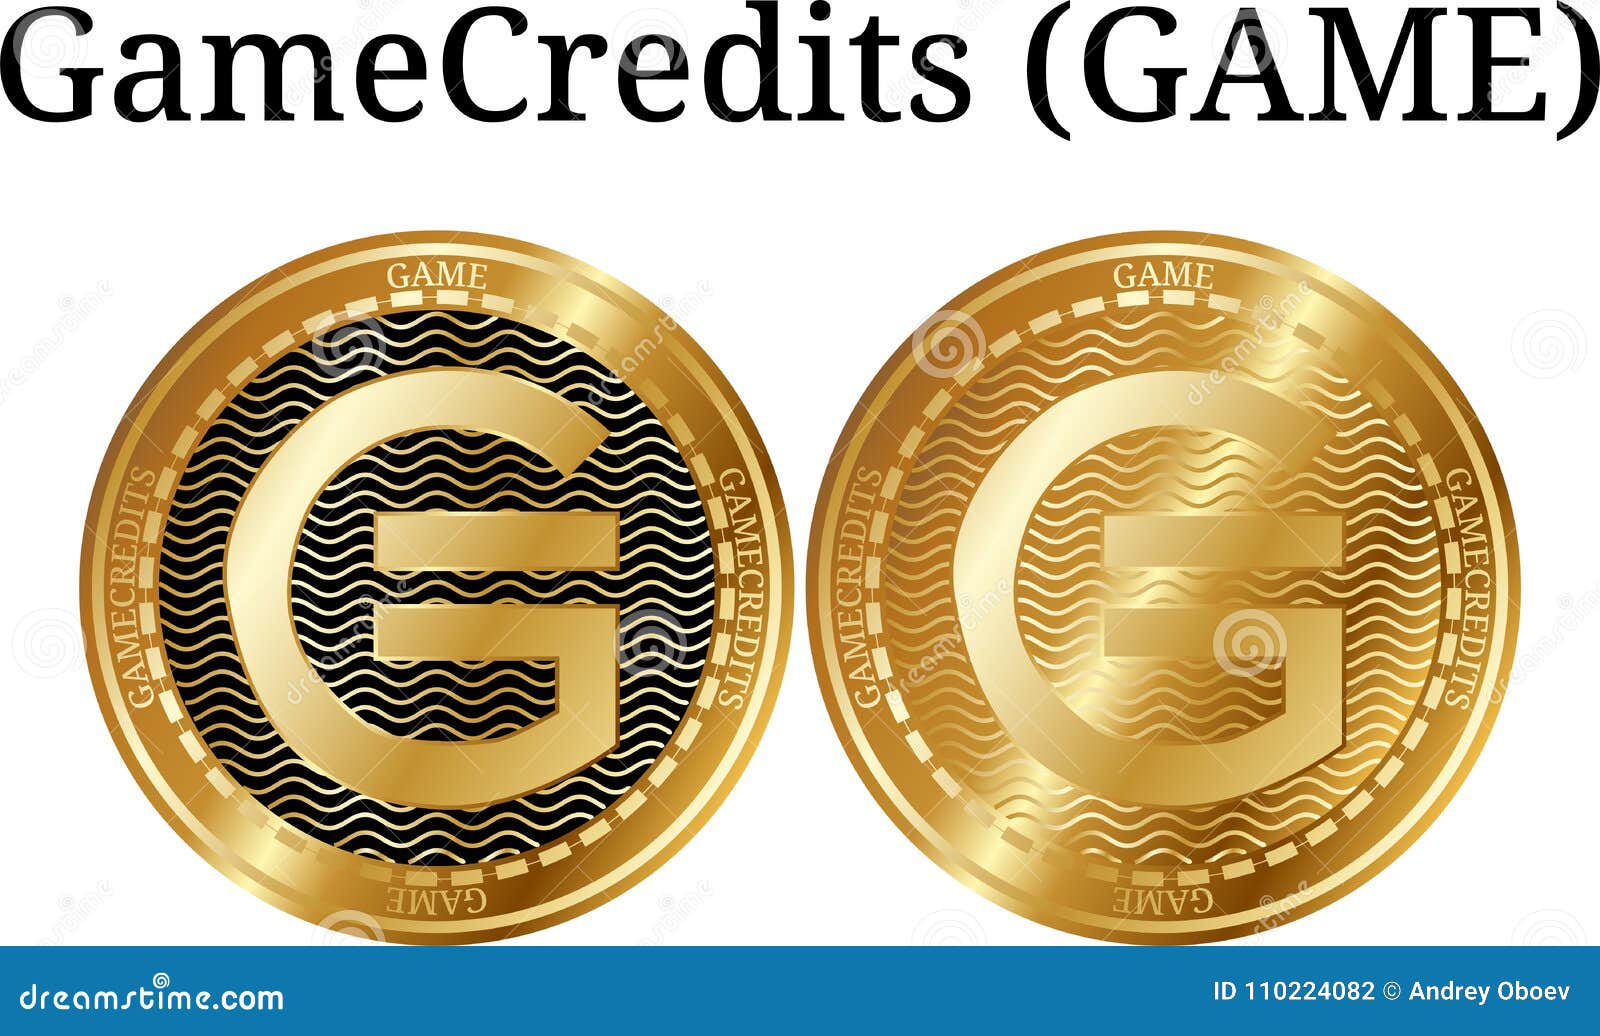 Set Of Physical Golden Coin GameCredits GAME Stock Vector ...